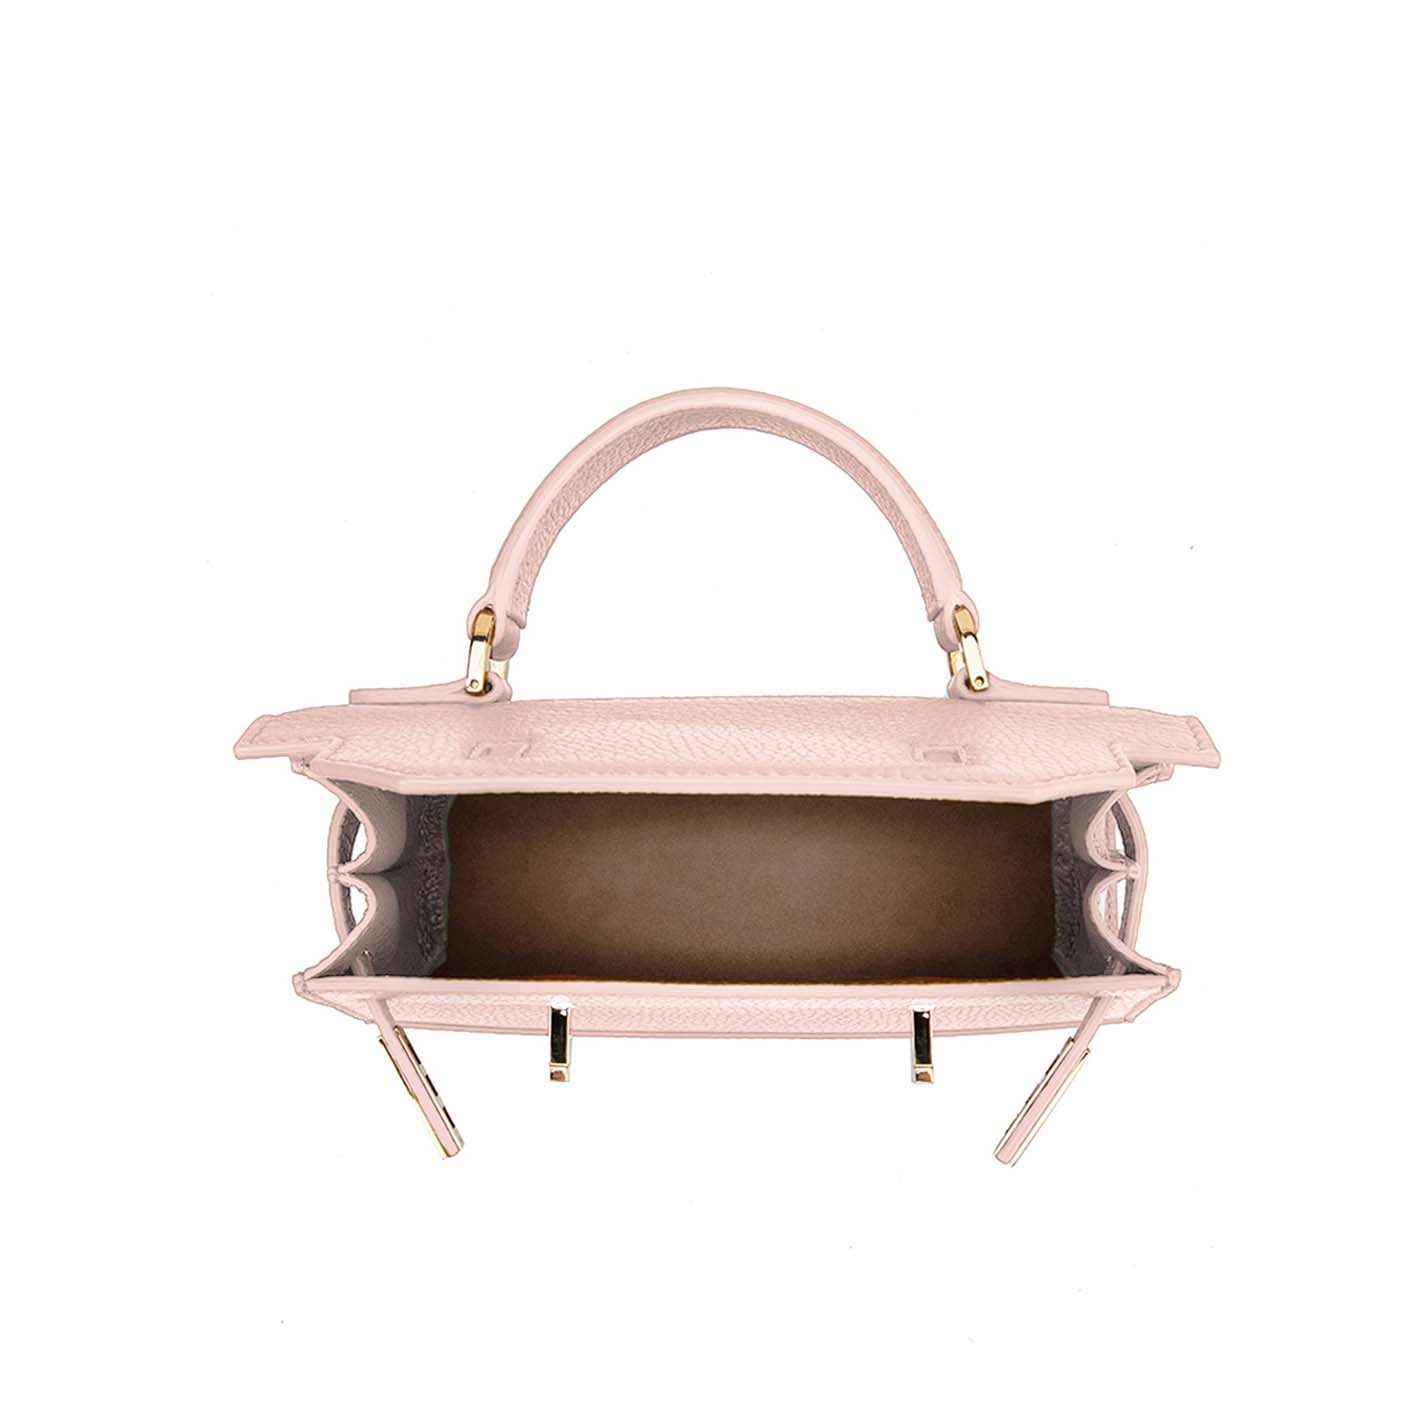 kim-stampatto-9-pink-leather-bag-open